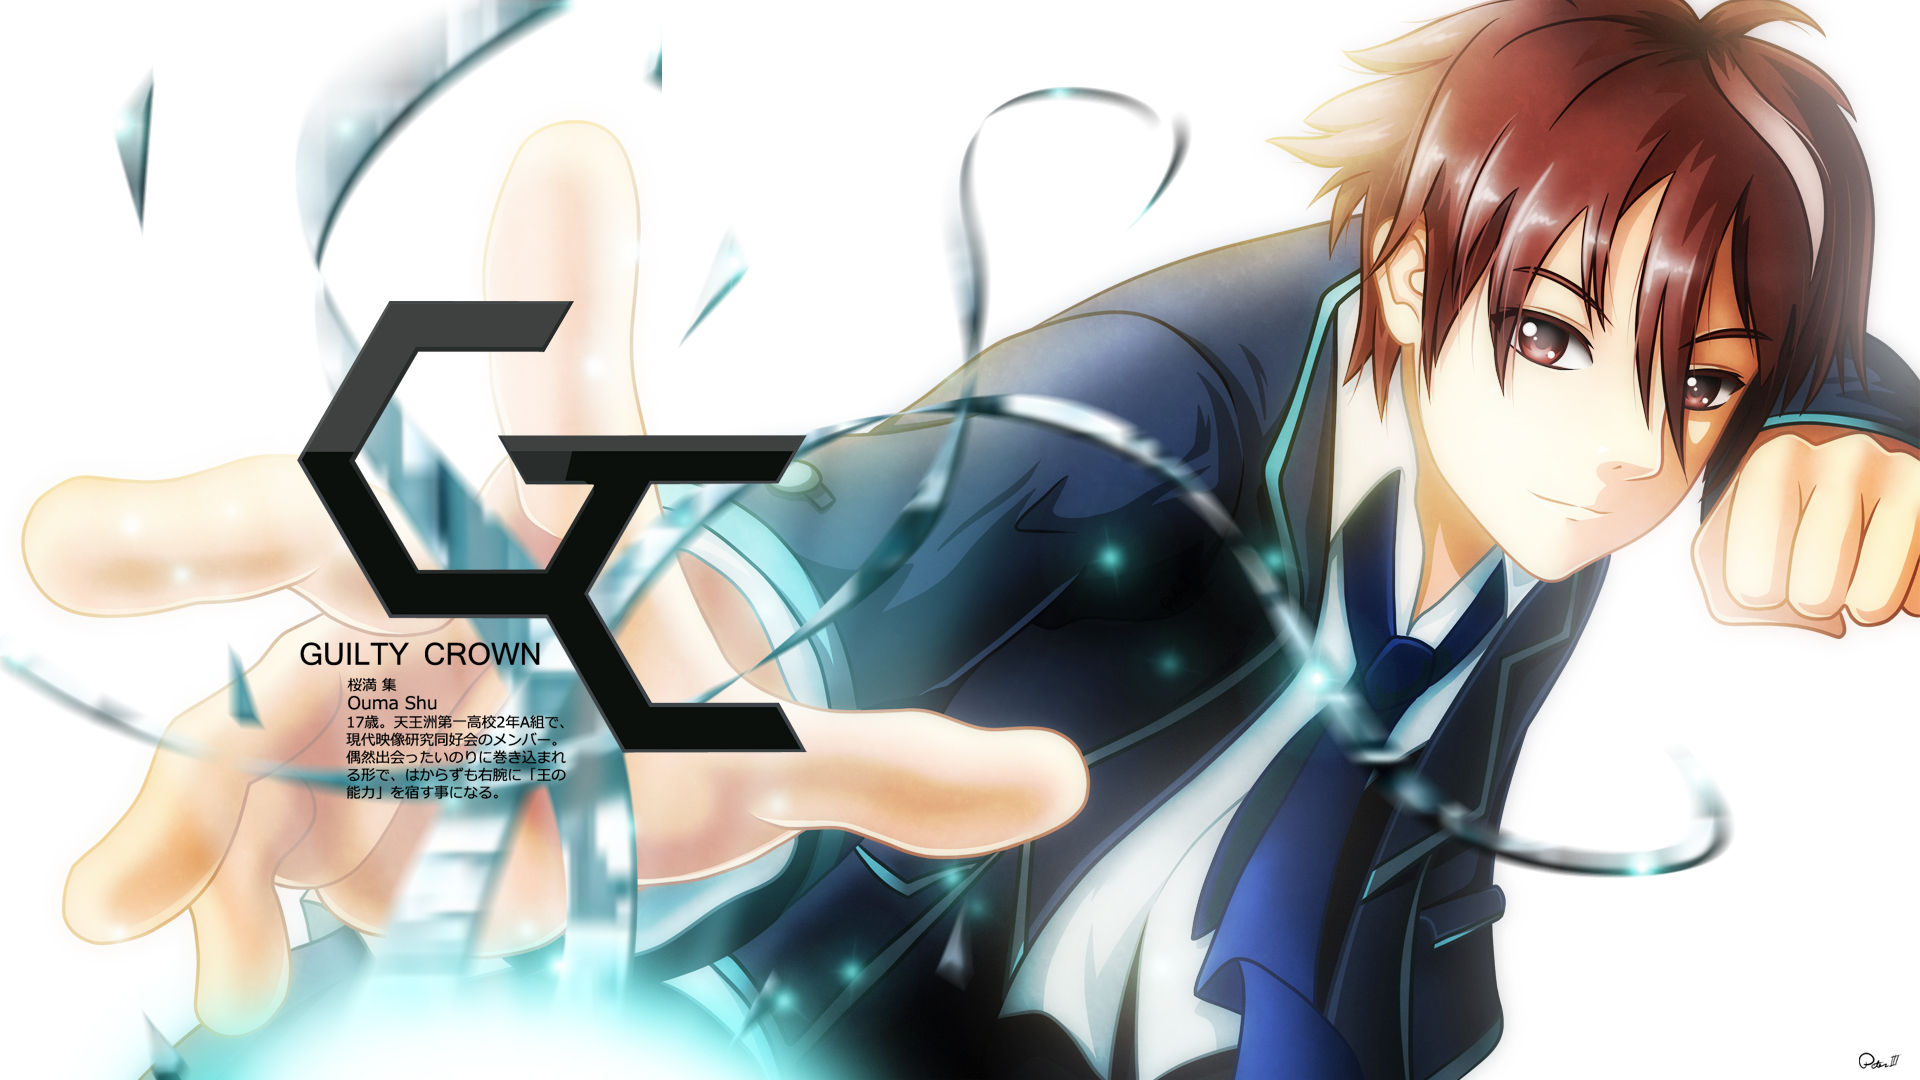 Anime Guilty Crown HD Wallpaper by Exiled-Artist